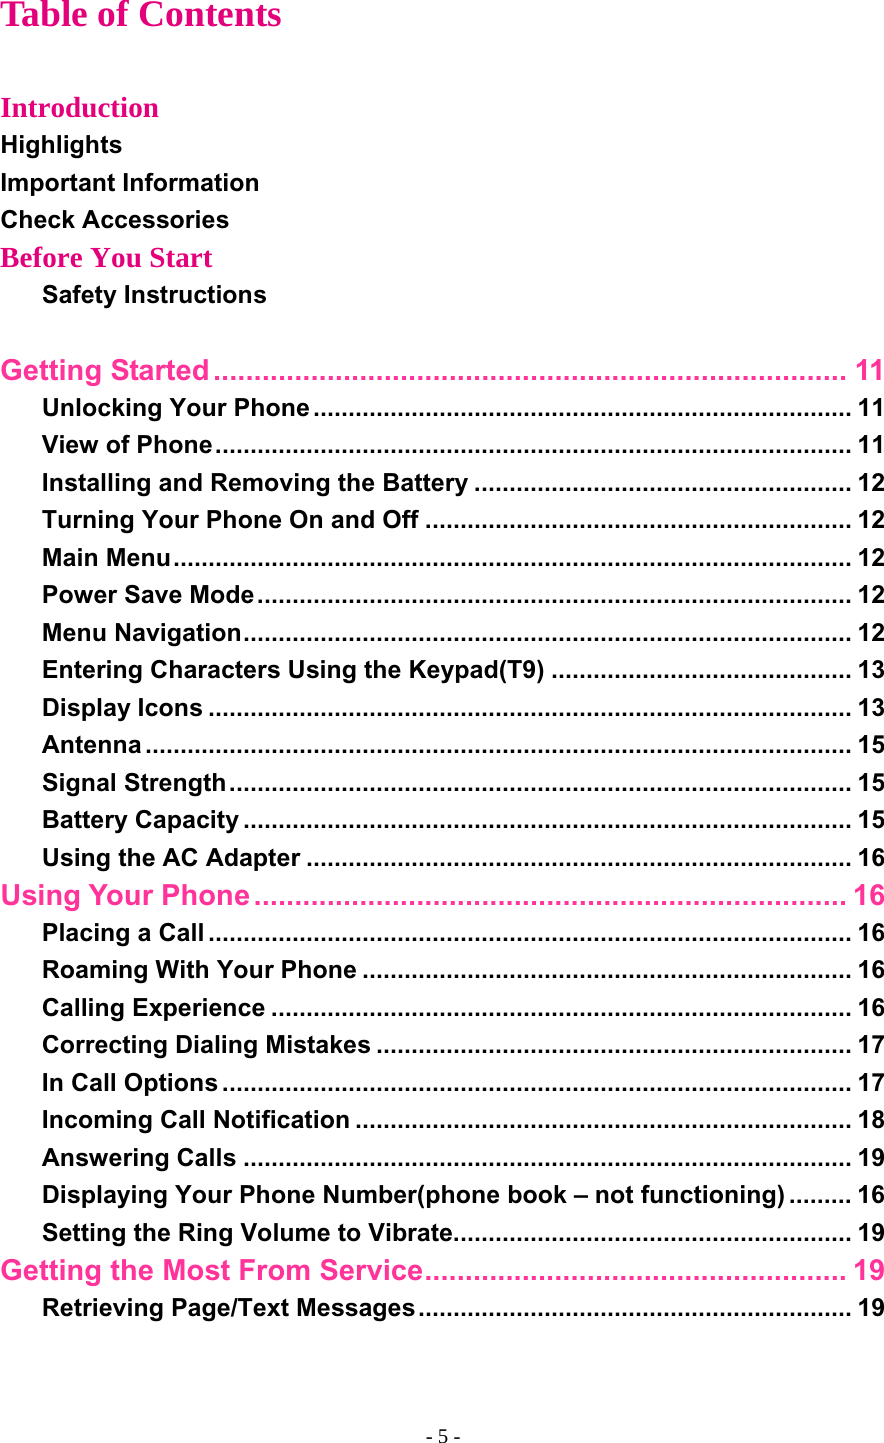 Table of Contents  Introduction Highlights Important Information Check Accessories Before You Start Safety Instructions  Getting Started.............................................................................. 11 Unlocking Your Phone ............................................................................. 11 View of Phone........................................................................................... 11 Installing and Removing the Battery ...................................................... 12 Turning Your Phone On and Off ............................................................. 12 Main Menu................................................................................................. 12 Power Save Mode..................................................................................... 12 Menu Navigation....................................................................................... 12 Entering Characters Using the Keypad(T9) ........................................... 13 Display Icons ............................................................................................ 13 Antenna ..................................................................................................... 15 Signal Strength......................................................................................... 15 Battery Capacity ....................................................................................... 15 Using the AC Adapter .............................................................................. 16 Using Your Phone ......................................................................... 16 Placing a Call ............................................................................................ 16 Roaming With Your Phone ...................................................................... 16 Calling Experience ................................................................................... 16 Correcting Dialing Mistakes .................................................................... 17 In Call Options .......................................................................................... 17 Incoming Call Notification ....................................................................... 18 Answering Calls ....................................................................................... 19 Displaying Your Phone Number(phone book – not functioning) ......... 16 Setting the Ring Volume to Vibrate......................................................... 19 Getting the Most From Service.................................................... 19 Retrieving Page/Text Messages.............................................................. 19 - 5 - 